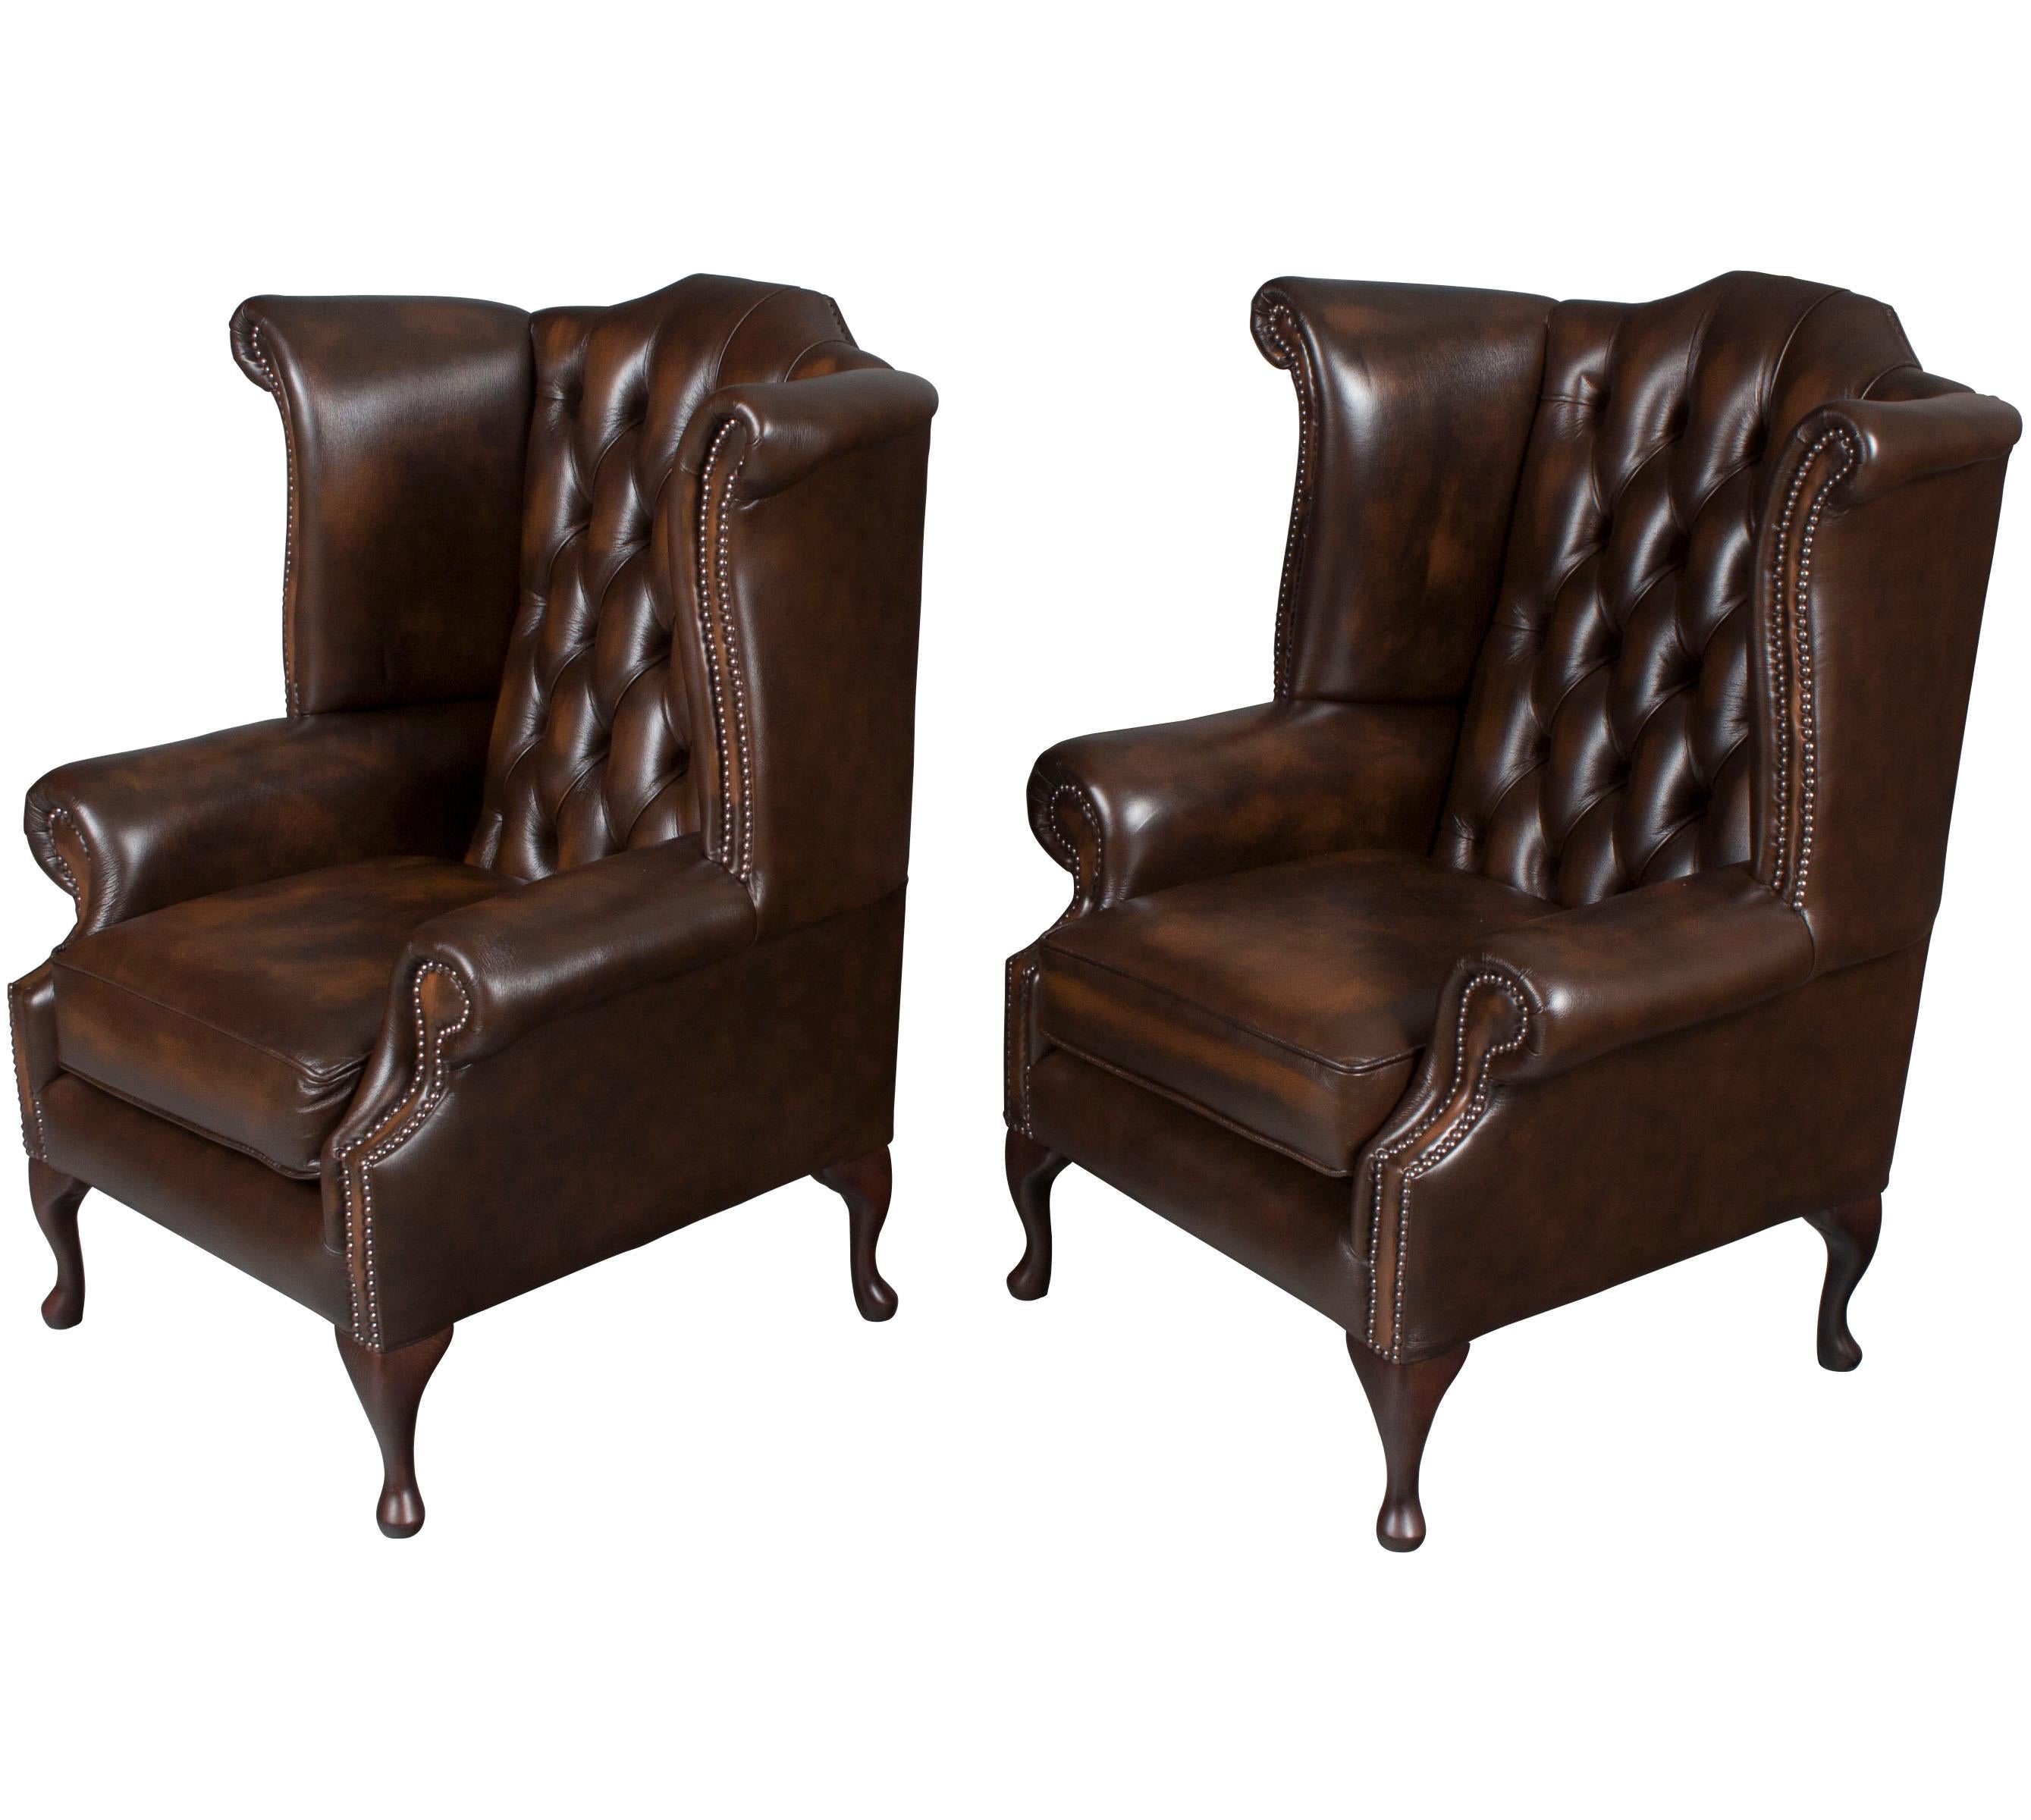 Queen Anne Pair of Brown Tufted Leather Wing Back Armchairs